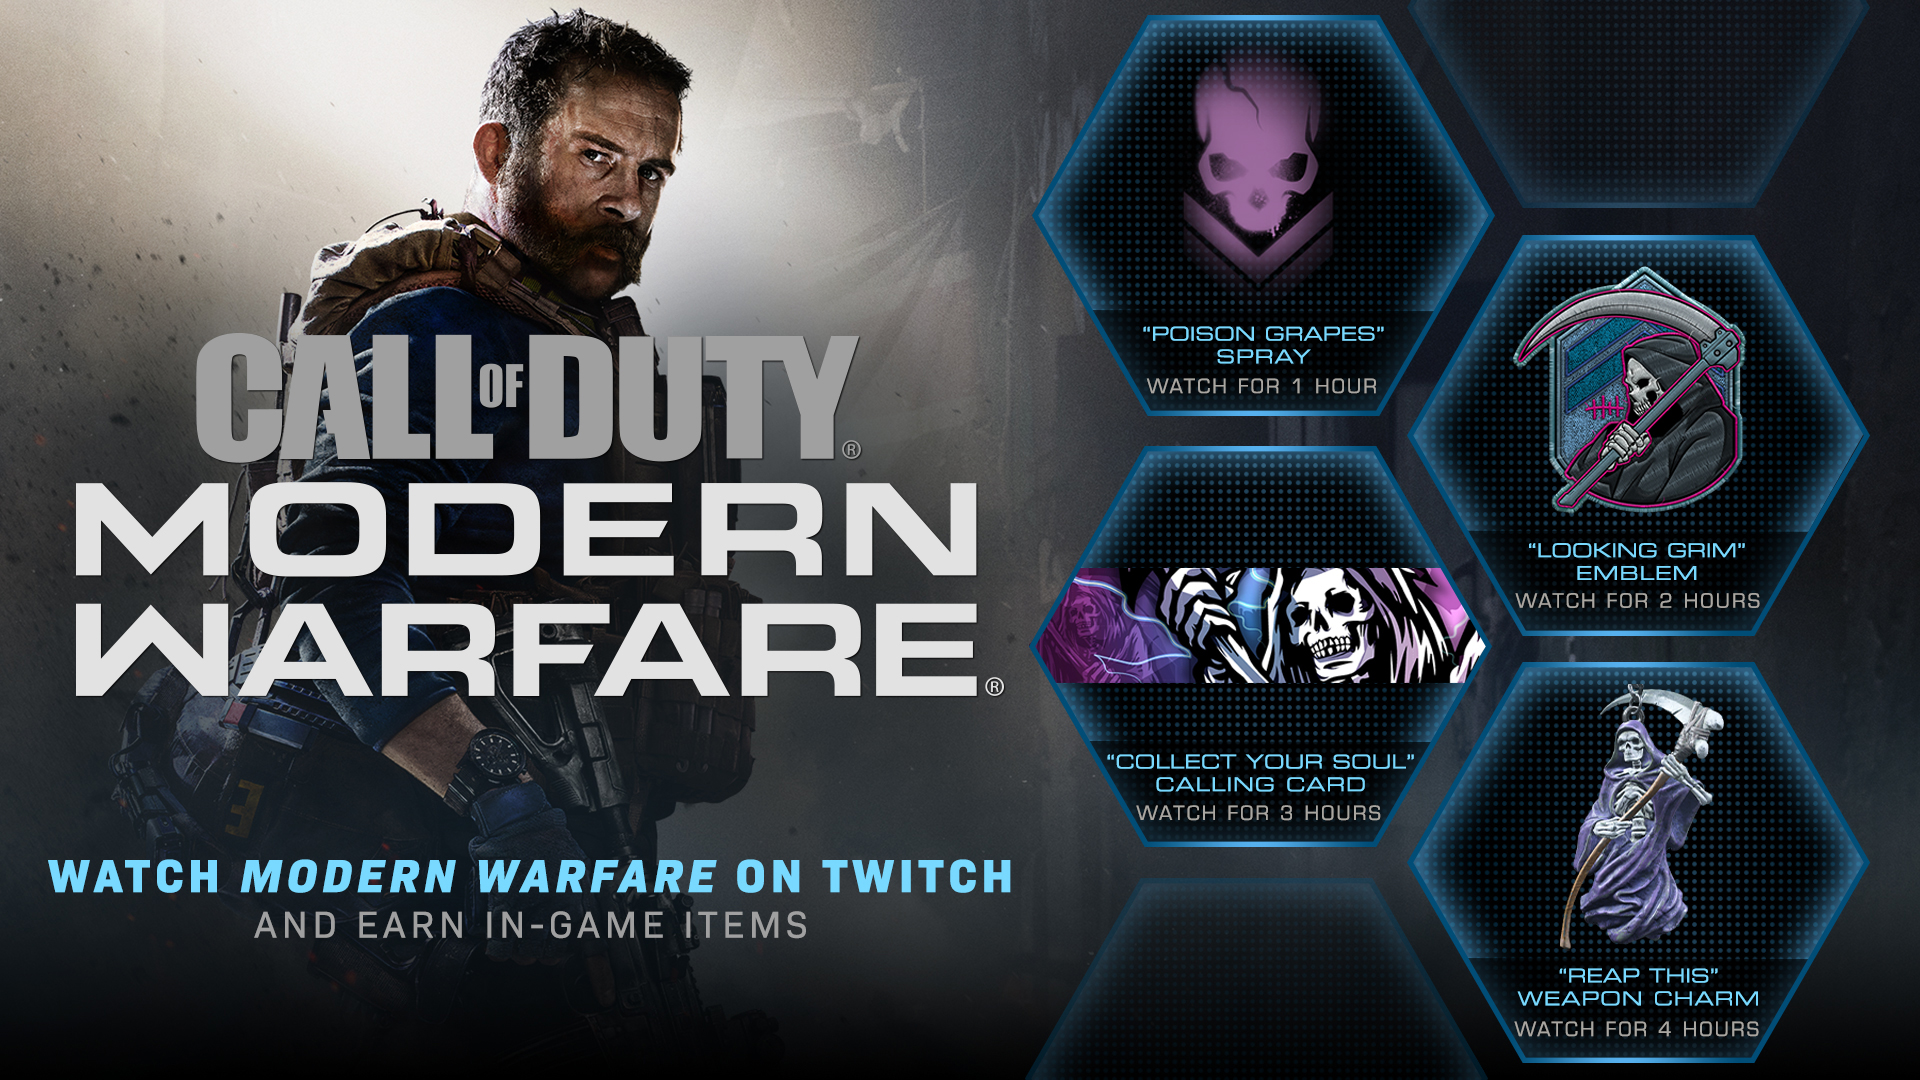 You can earn in-game Modern Warfare loot by watching streamers on